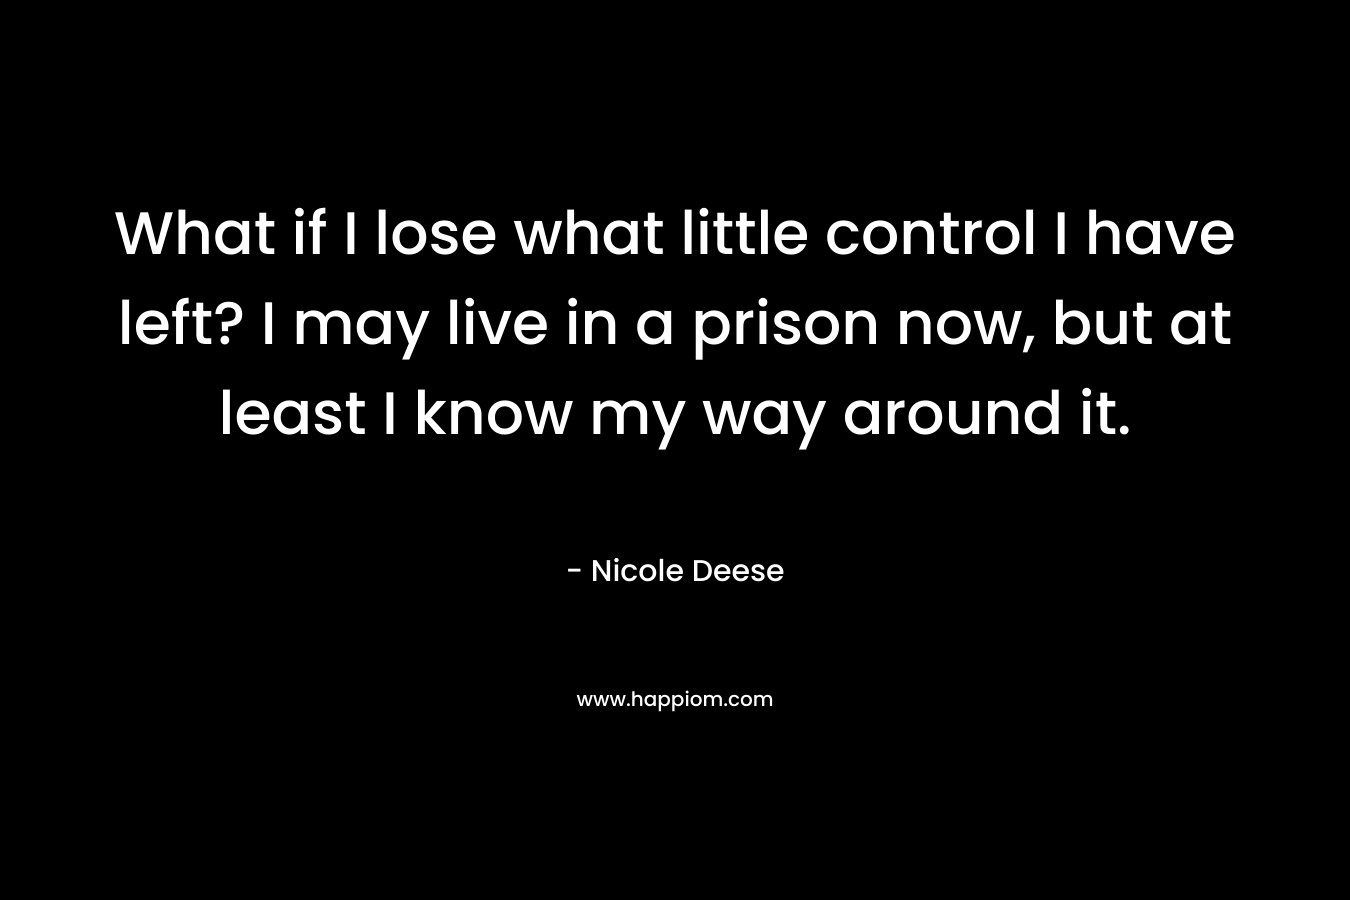 What if I lose what little control I have left? I may live in a prison now, but at least I know my way around it. – Nicole Deese